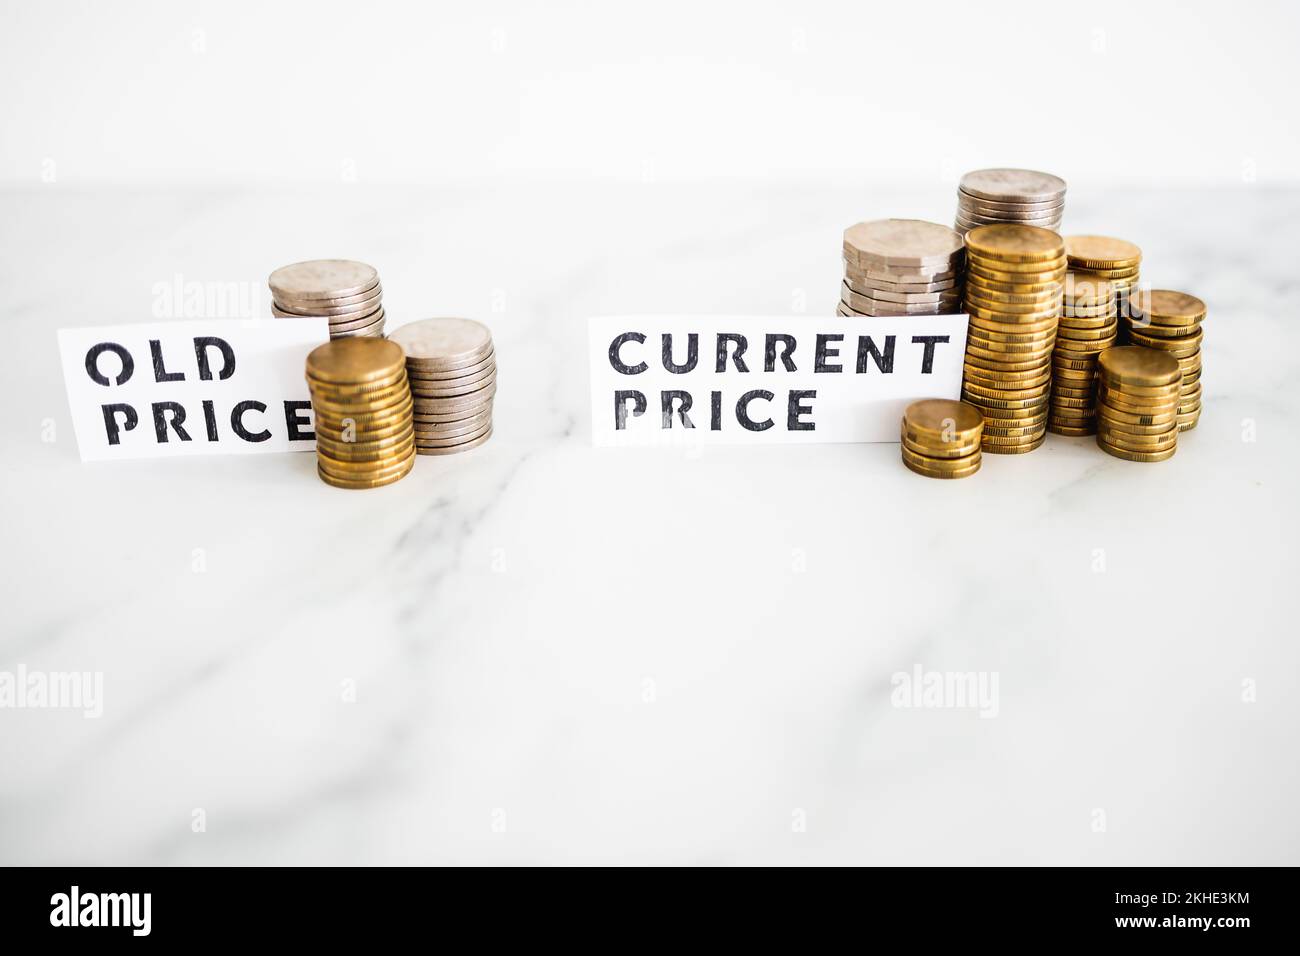 inflation and cost of living going up concept, Old price vs Current Price with small and big stacks of coins side by side for comparison Stock Photo